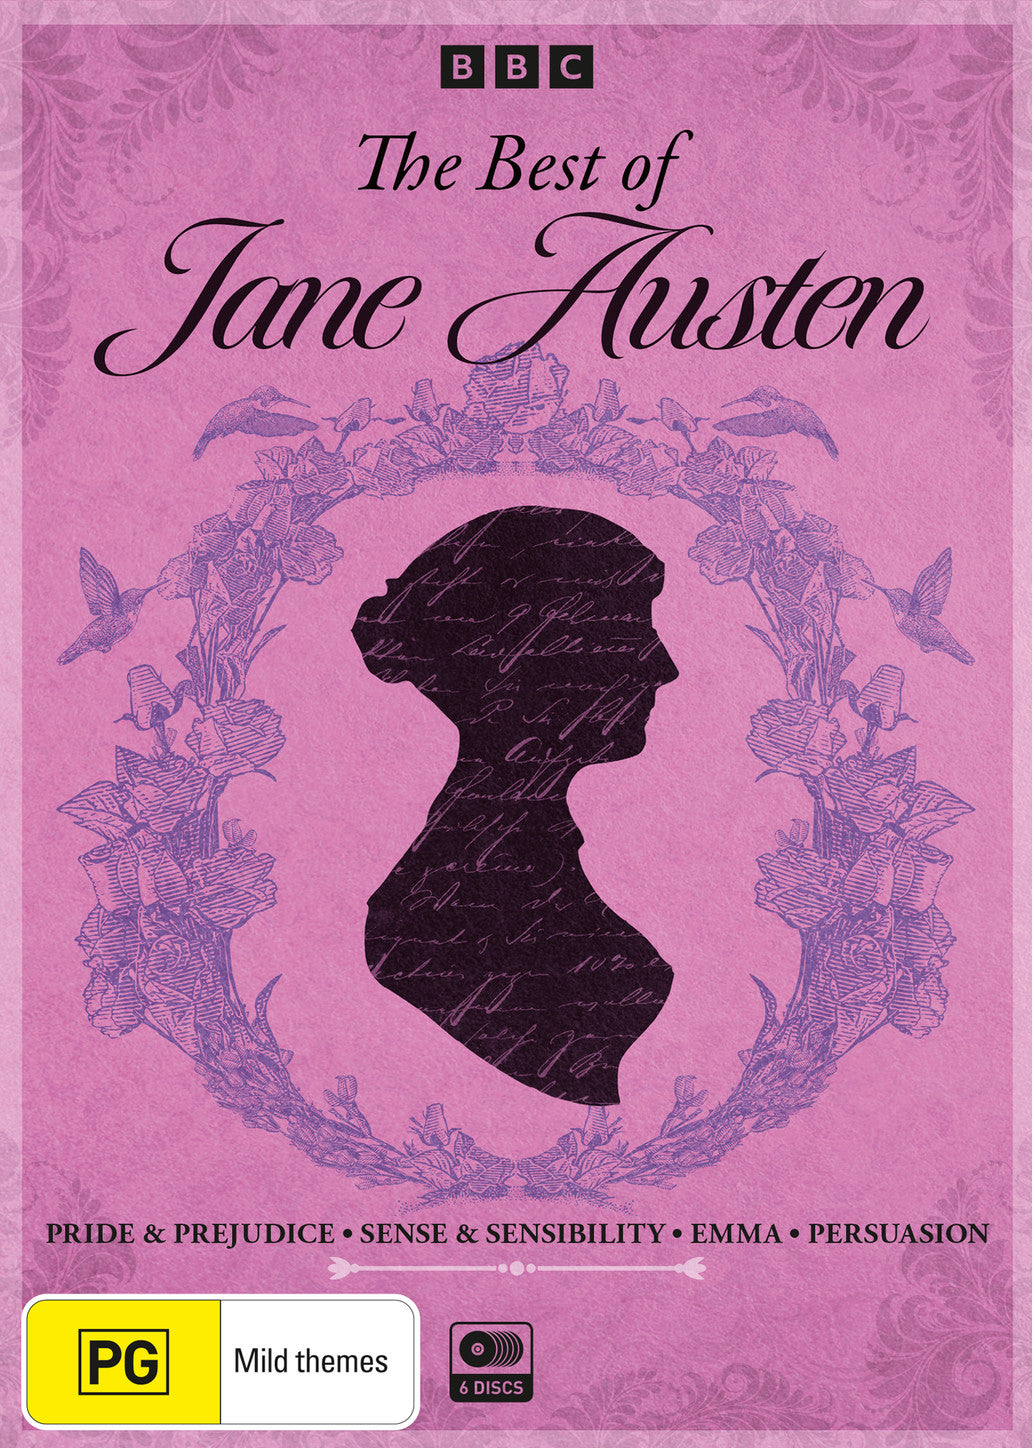 THE BEST OF JANE AUSTEN: THE COLLECTION